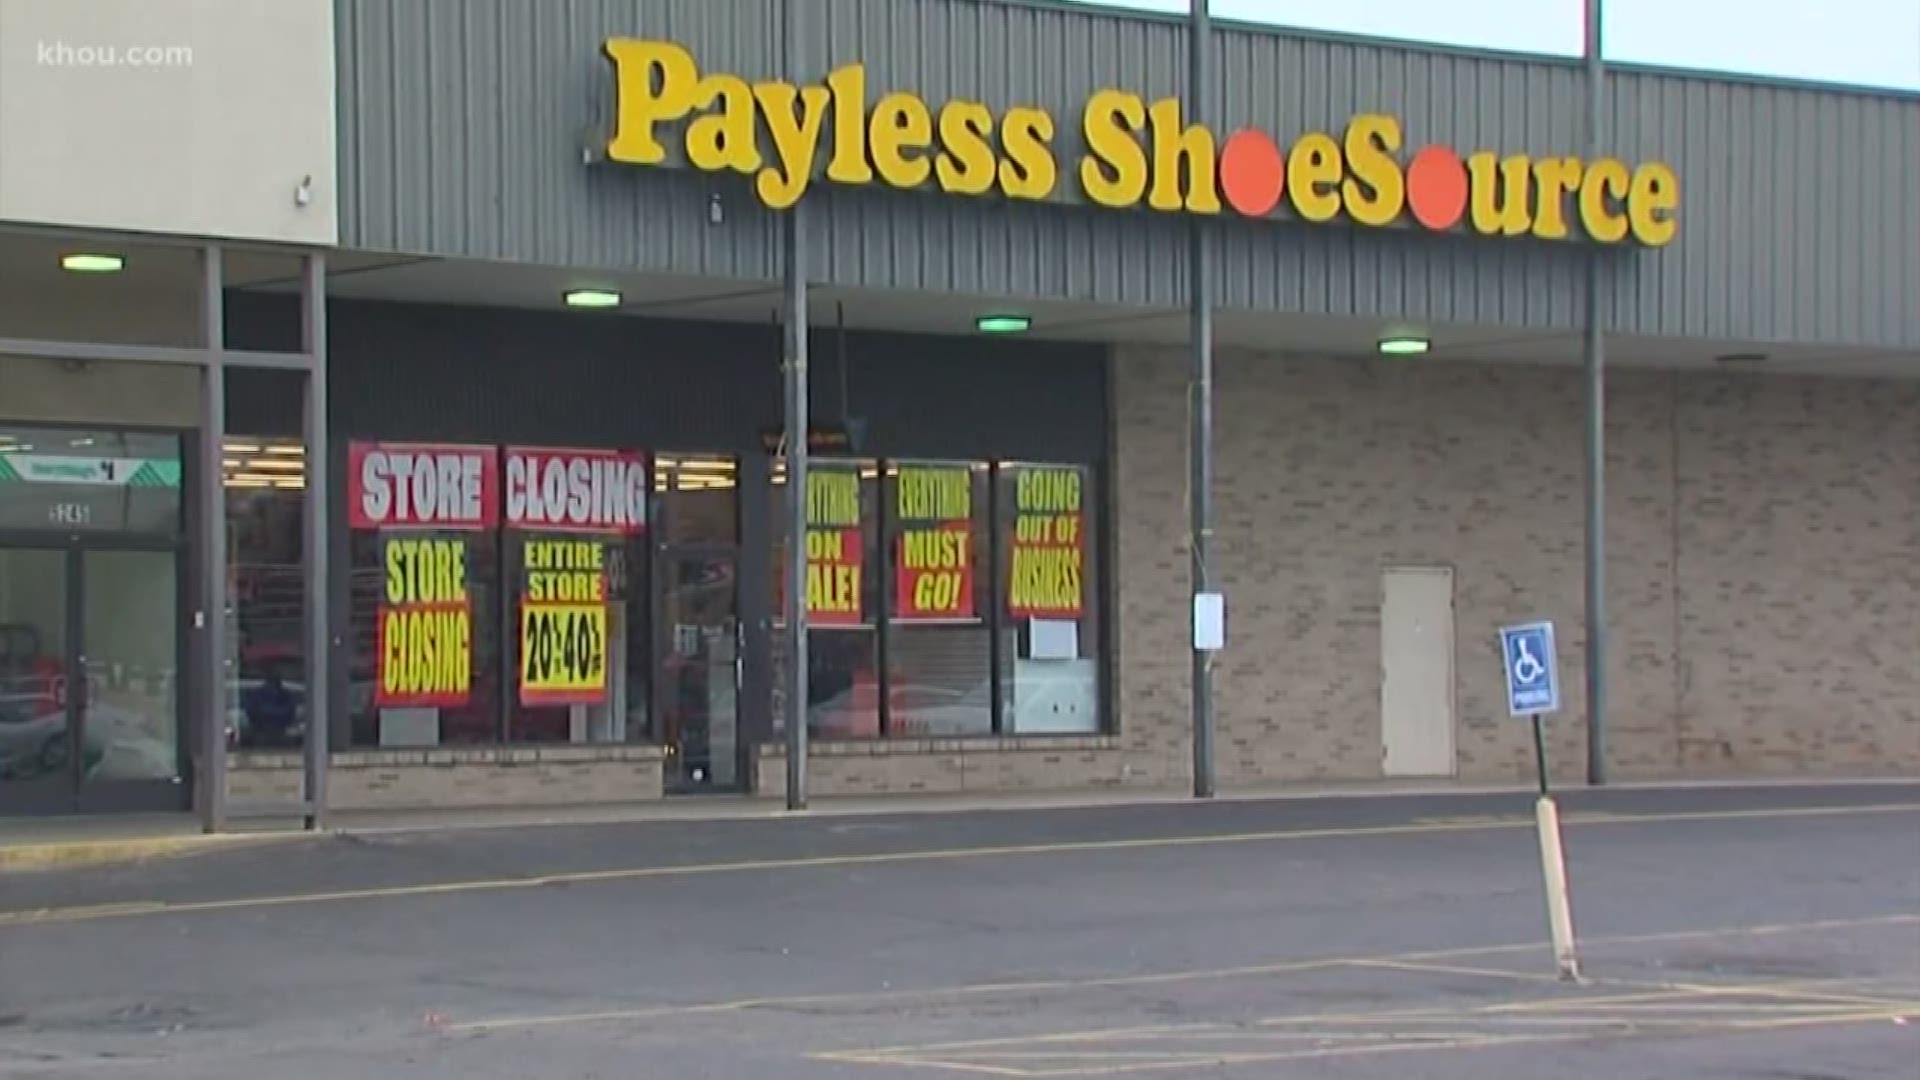 Payless Shoe closing sales: Any good 